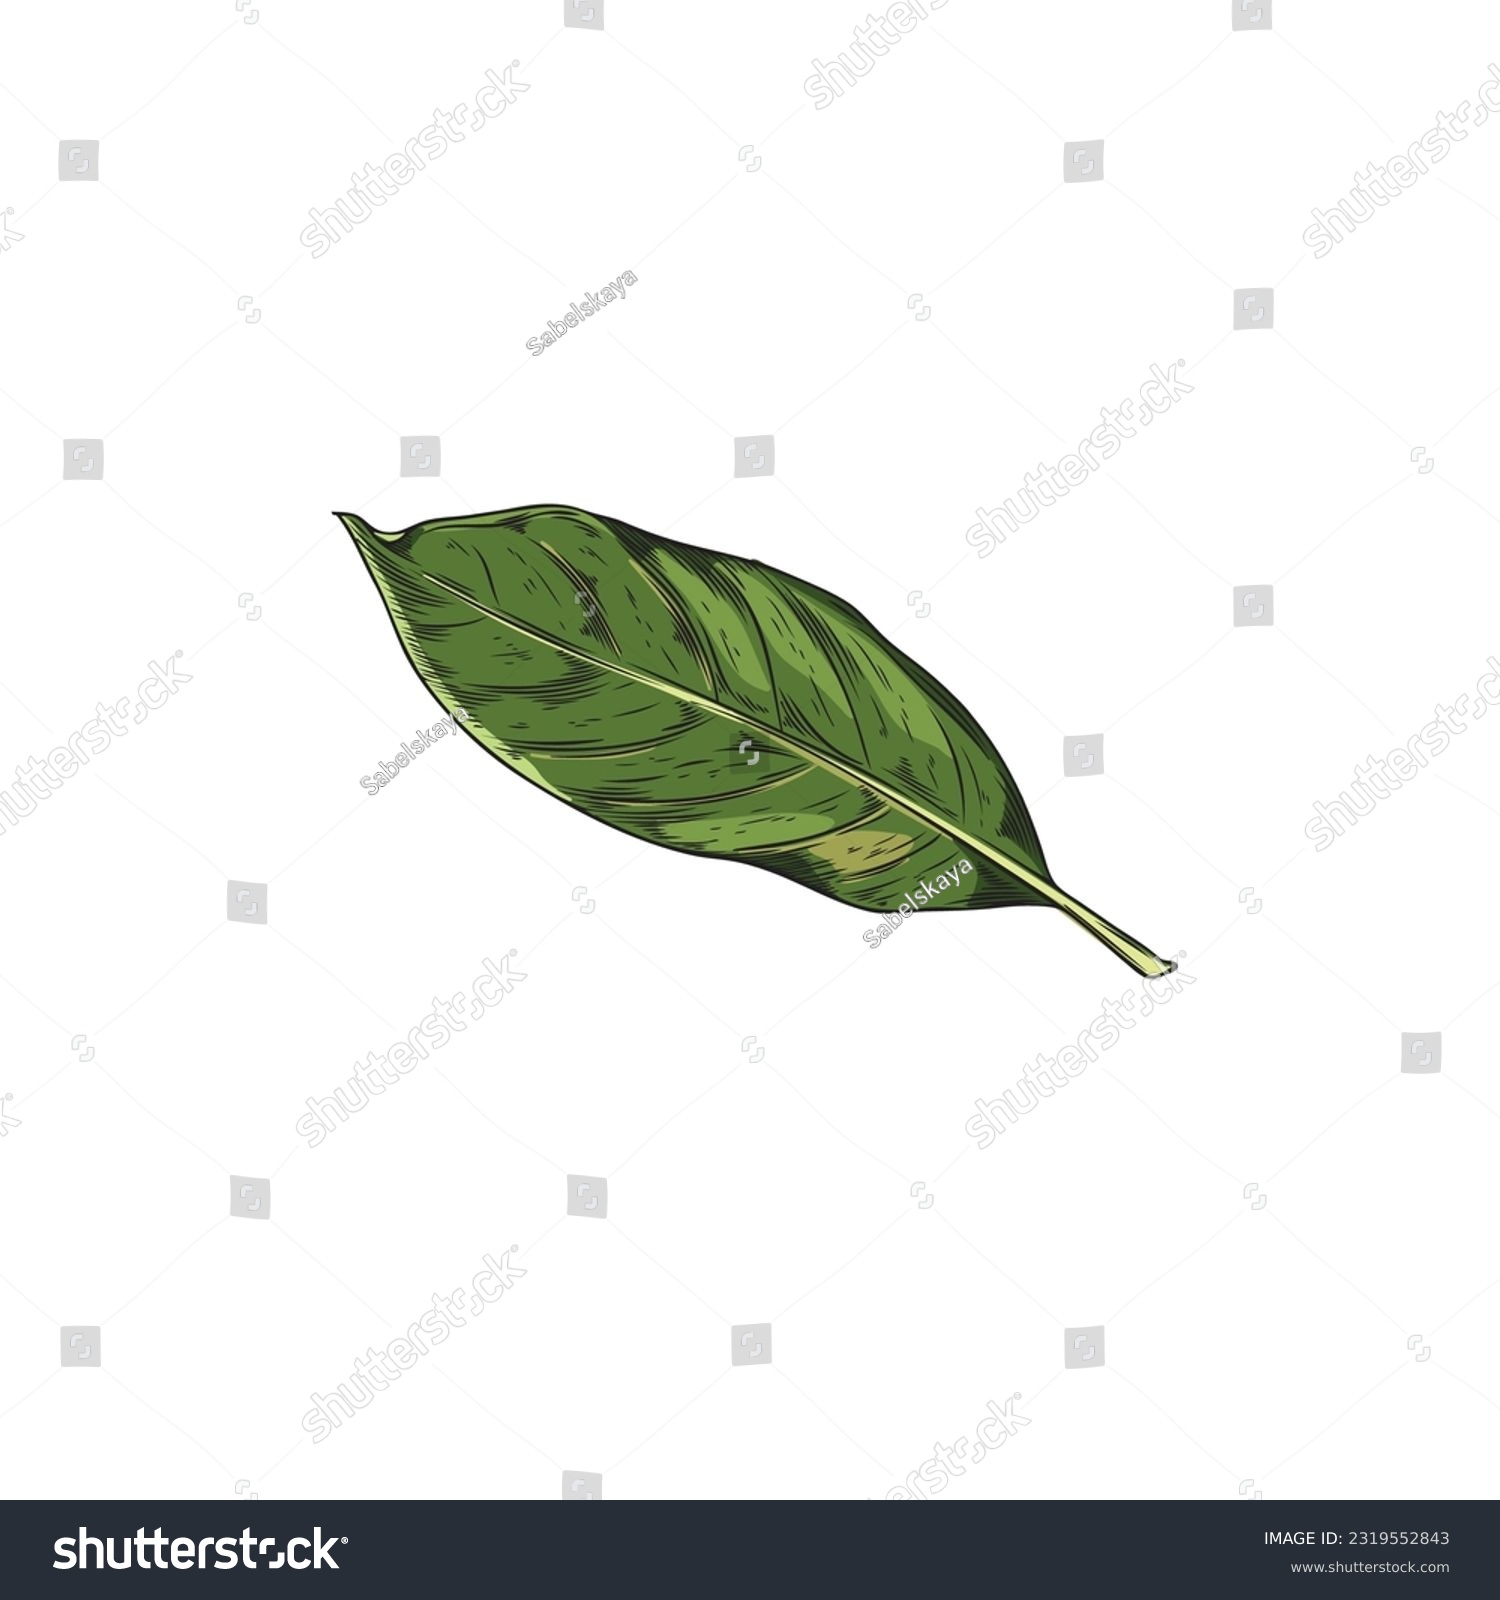 SVG of Hand drawn single bay leaf. One green tea leave. Full color vector realistic sketch illustration of bay leave isolated on white background. Herbs, spices, natural flavors concept svg